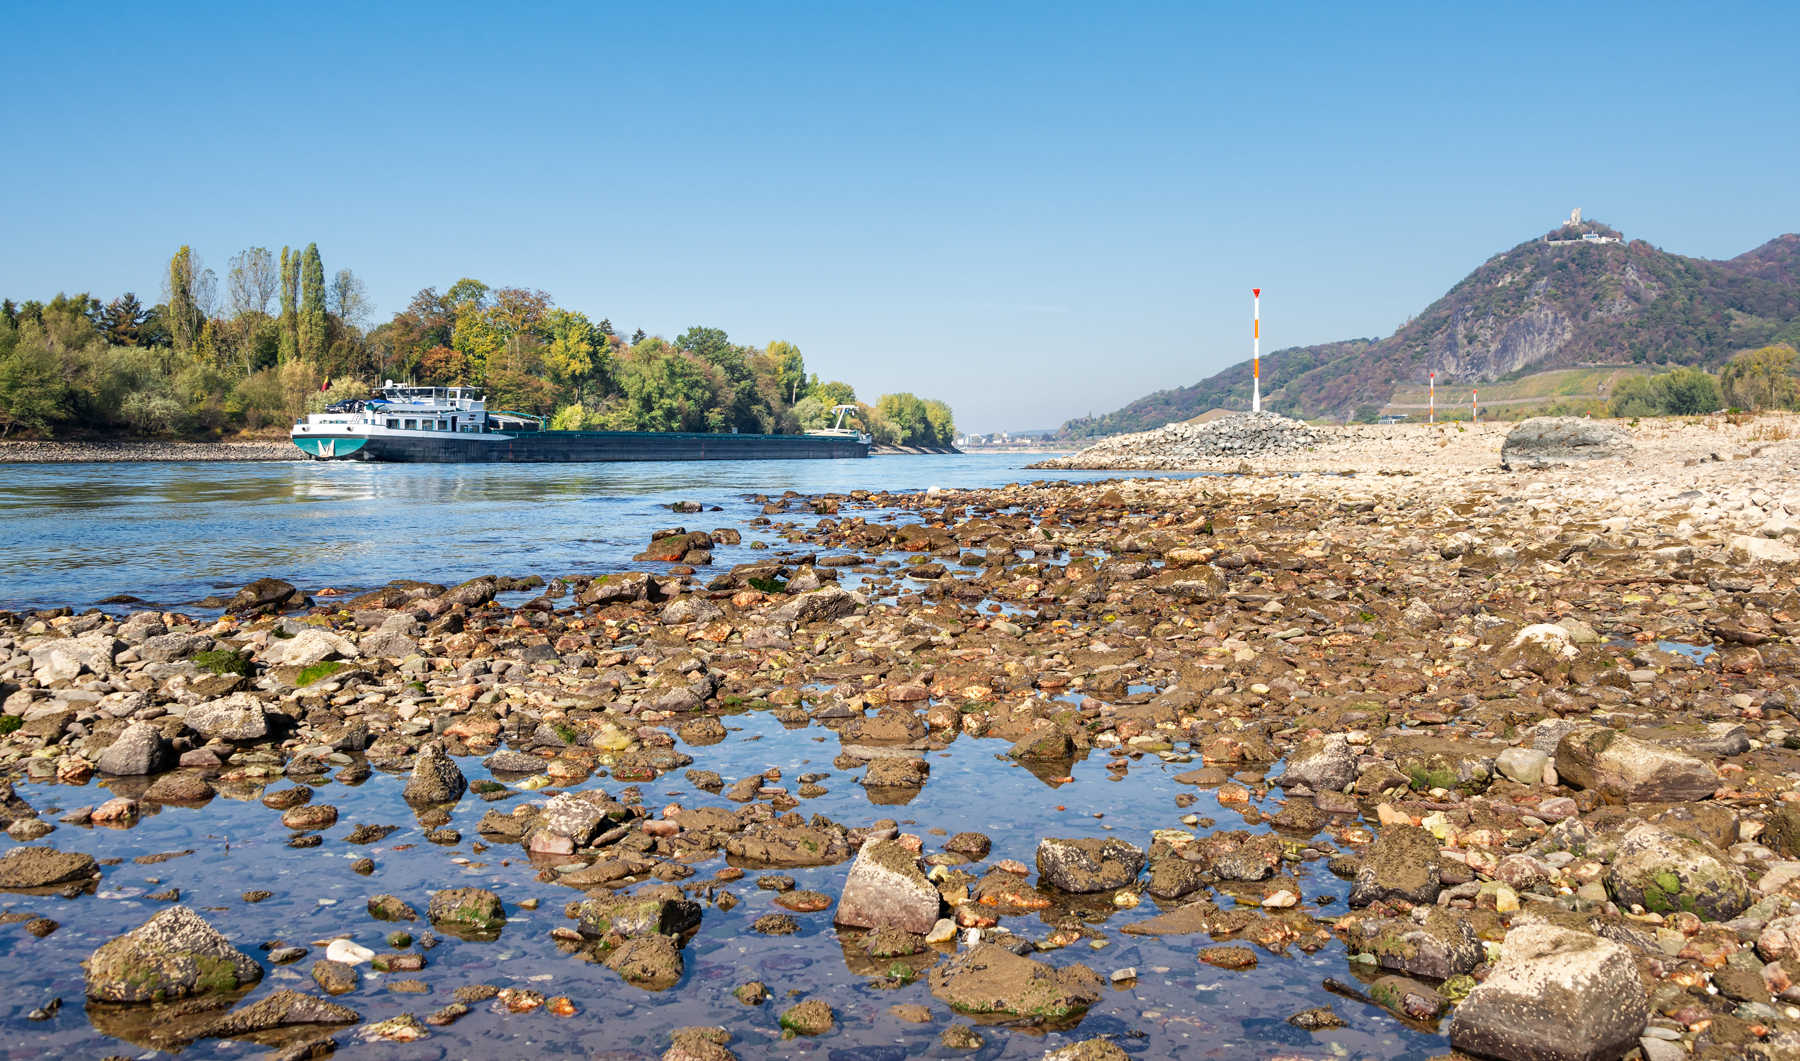 Low water levels on the Rhine River Cruise